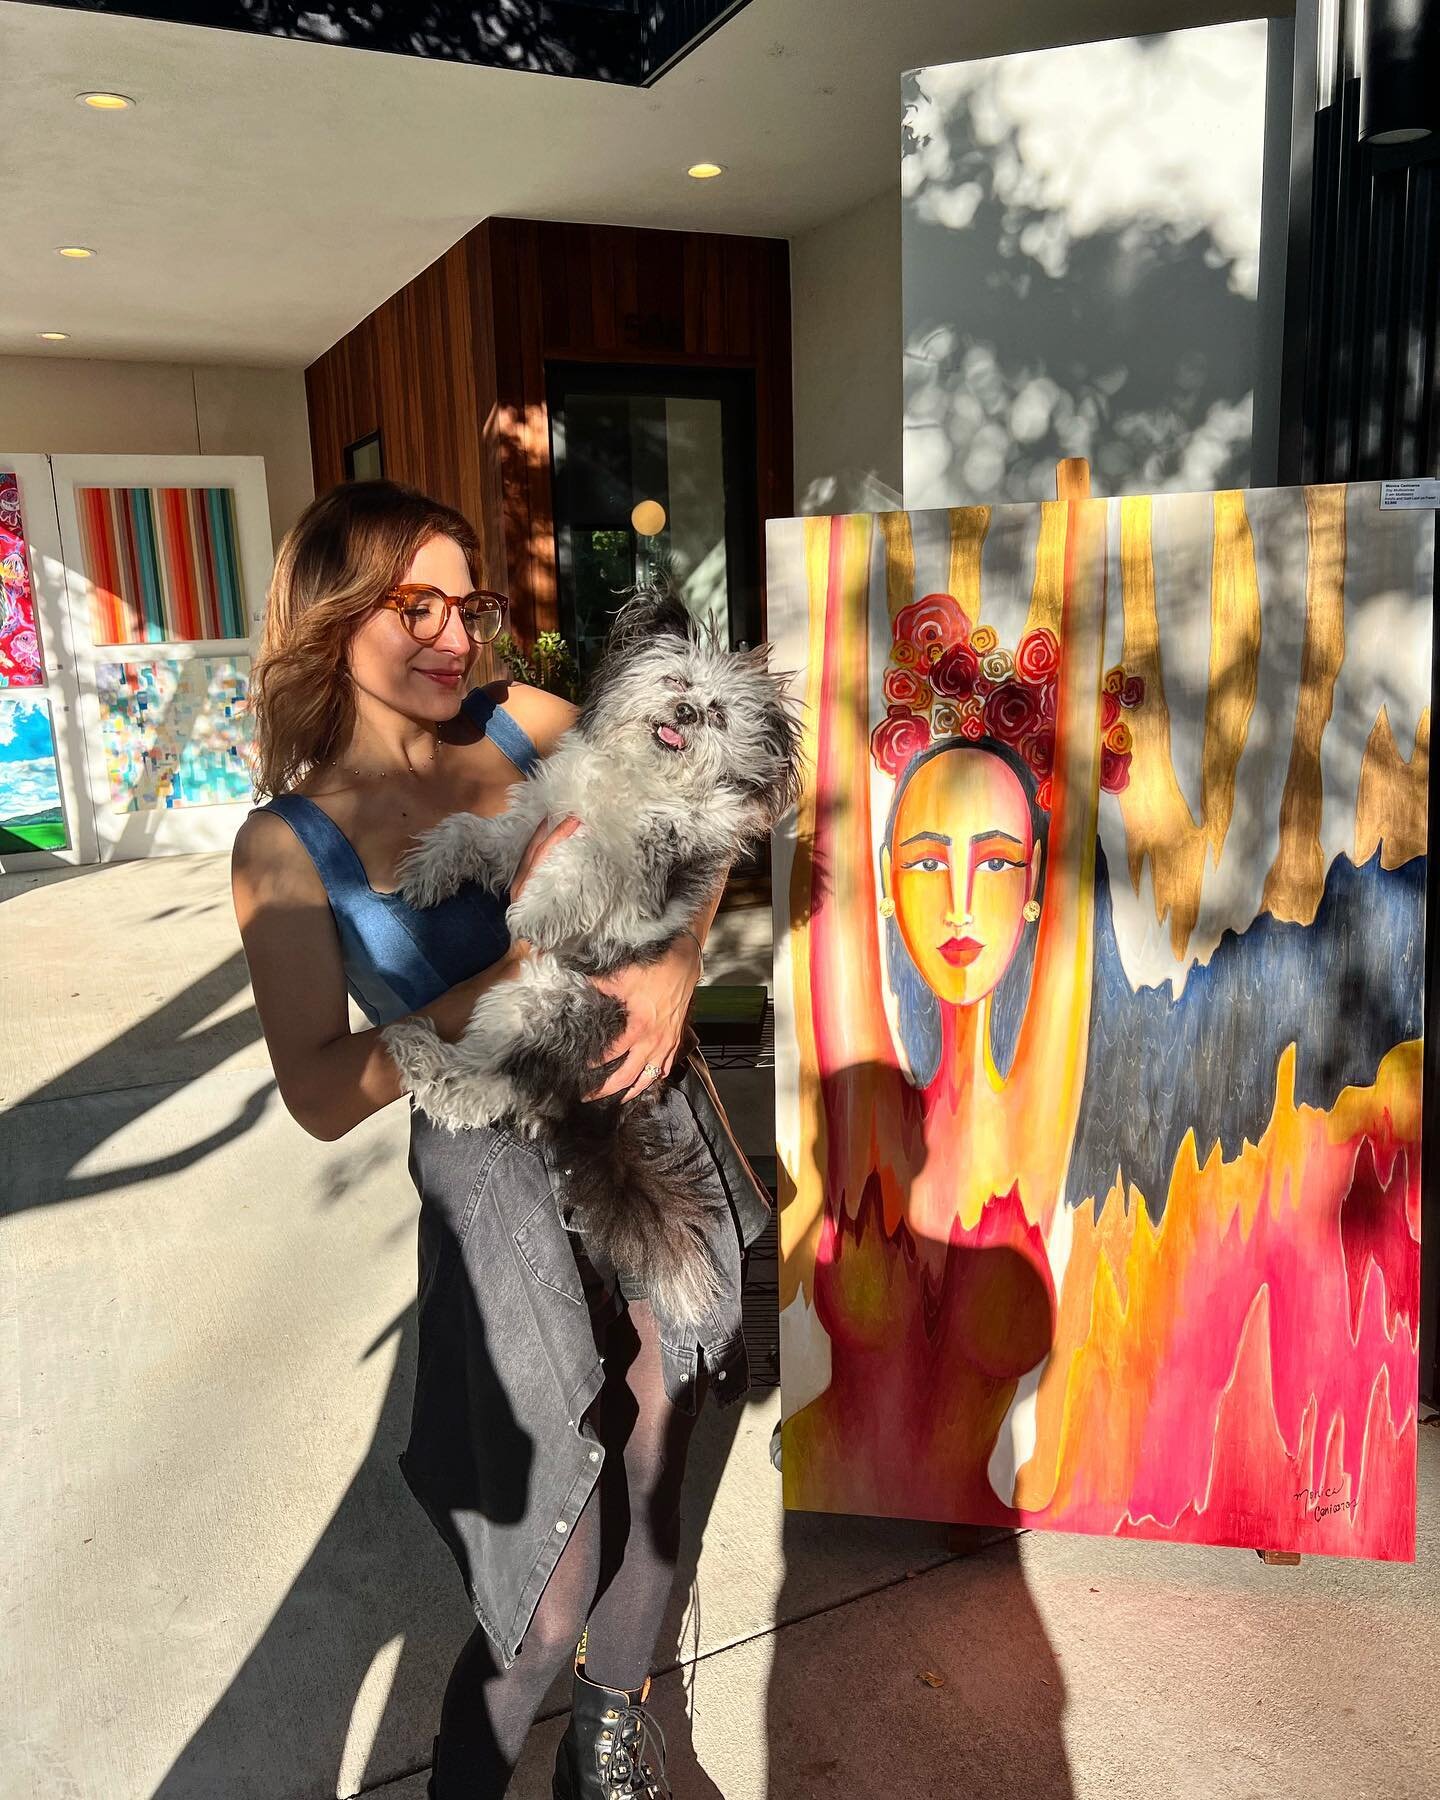 Art show season kicked off today and Frida over did it again on day 1 #rookie 

Come see us tomorrow at @travisheightsart ! Thanks to everyone that came in today to support and shop local art 🥰☺️

We&rsquo;ll be at 506 Leland from 11am-5pm tomorrow,